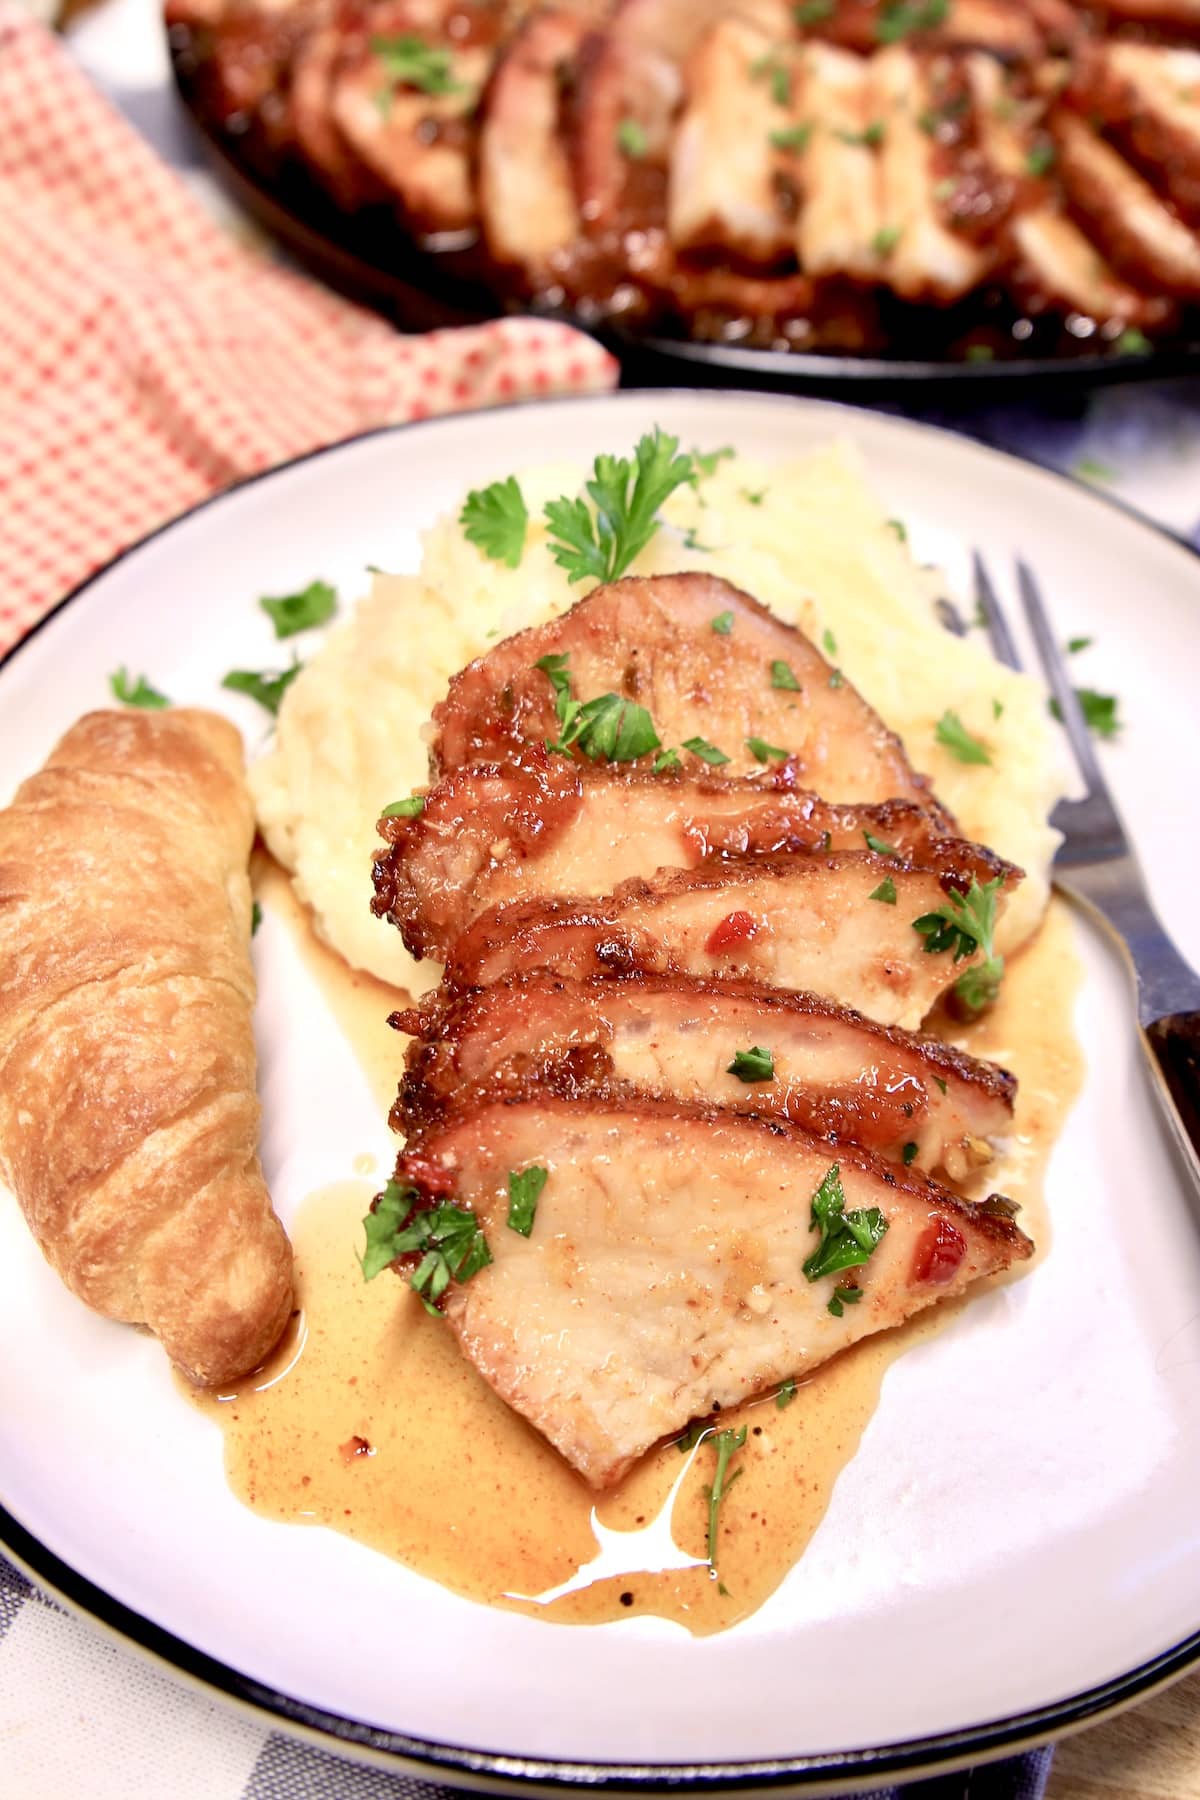 Sliced pork loin on a plate with mashed potatoes and crescent roll.